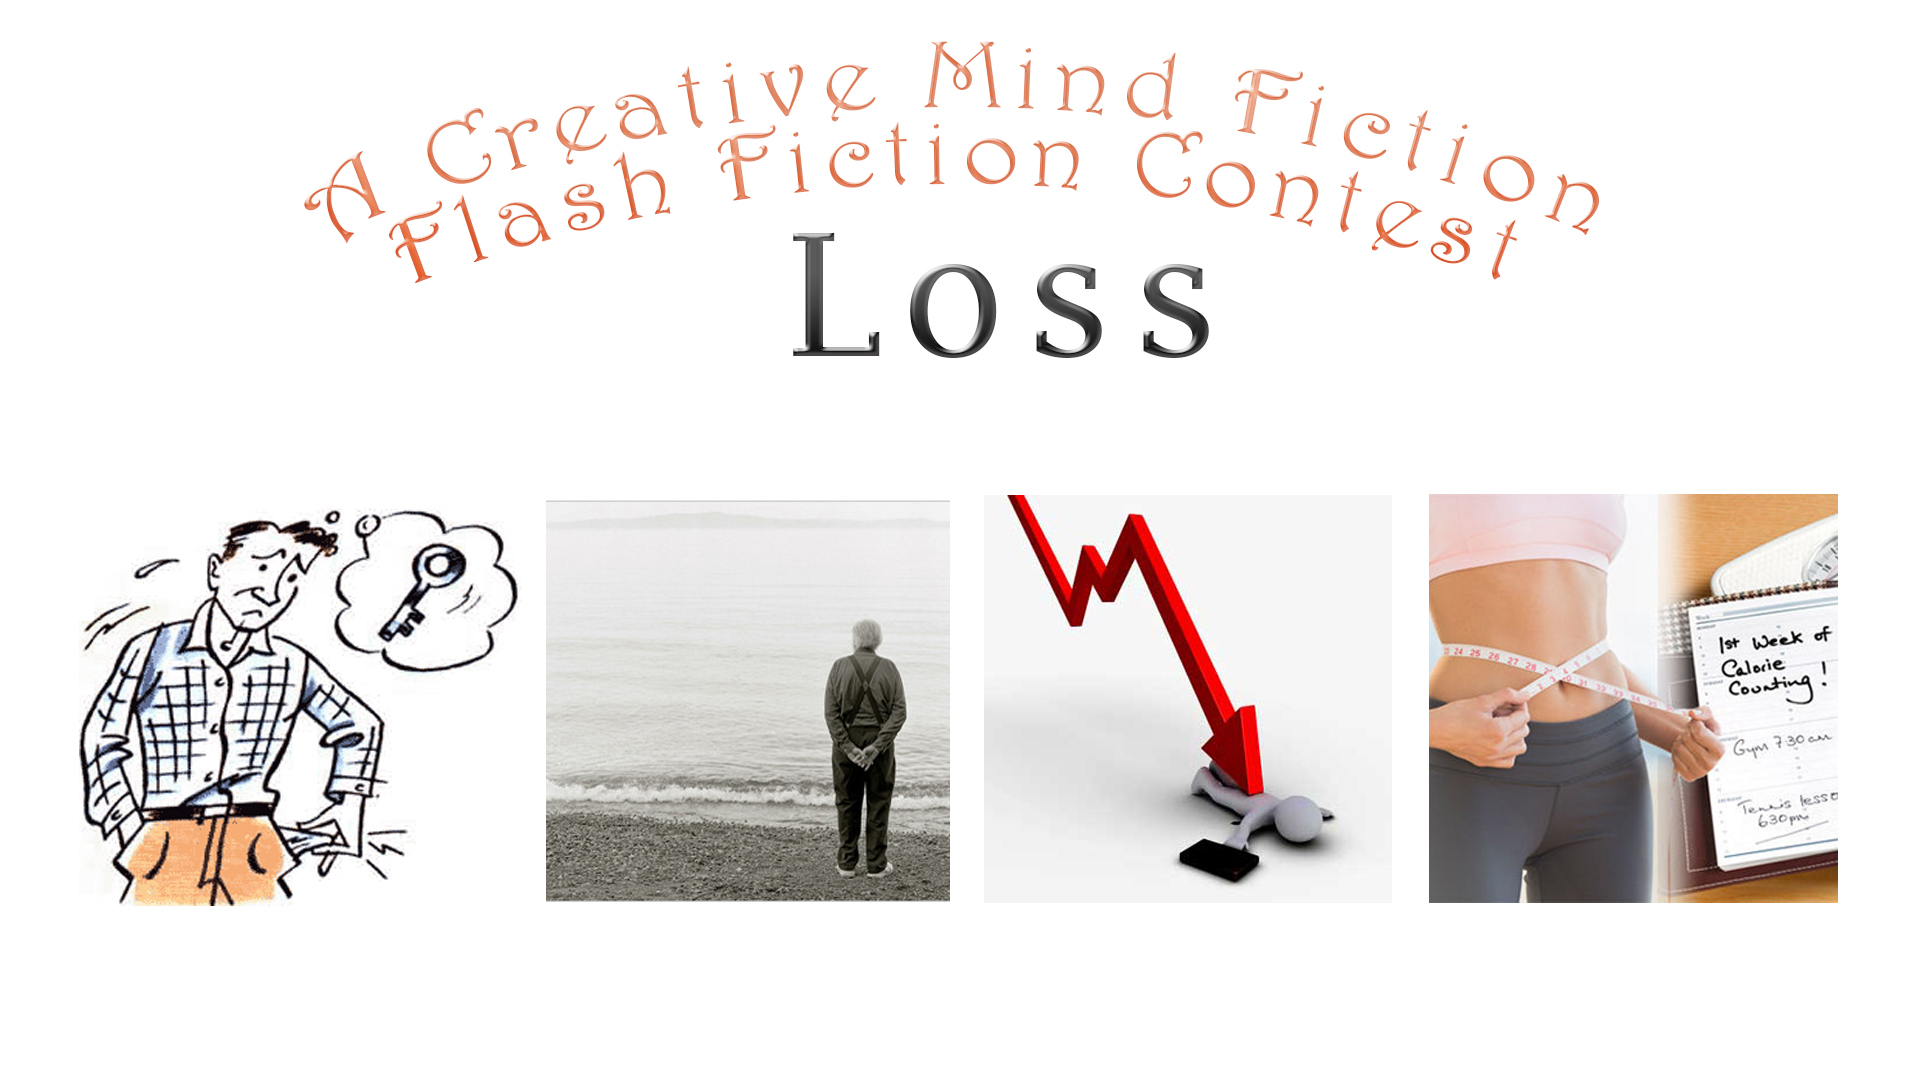 July 26 - August 8, 2018 Flash Fiction Contest "Loss"